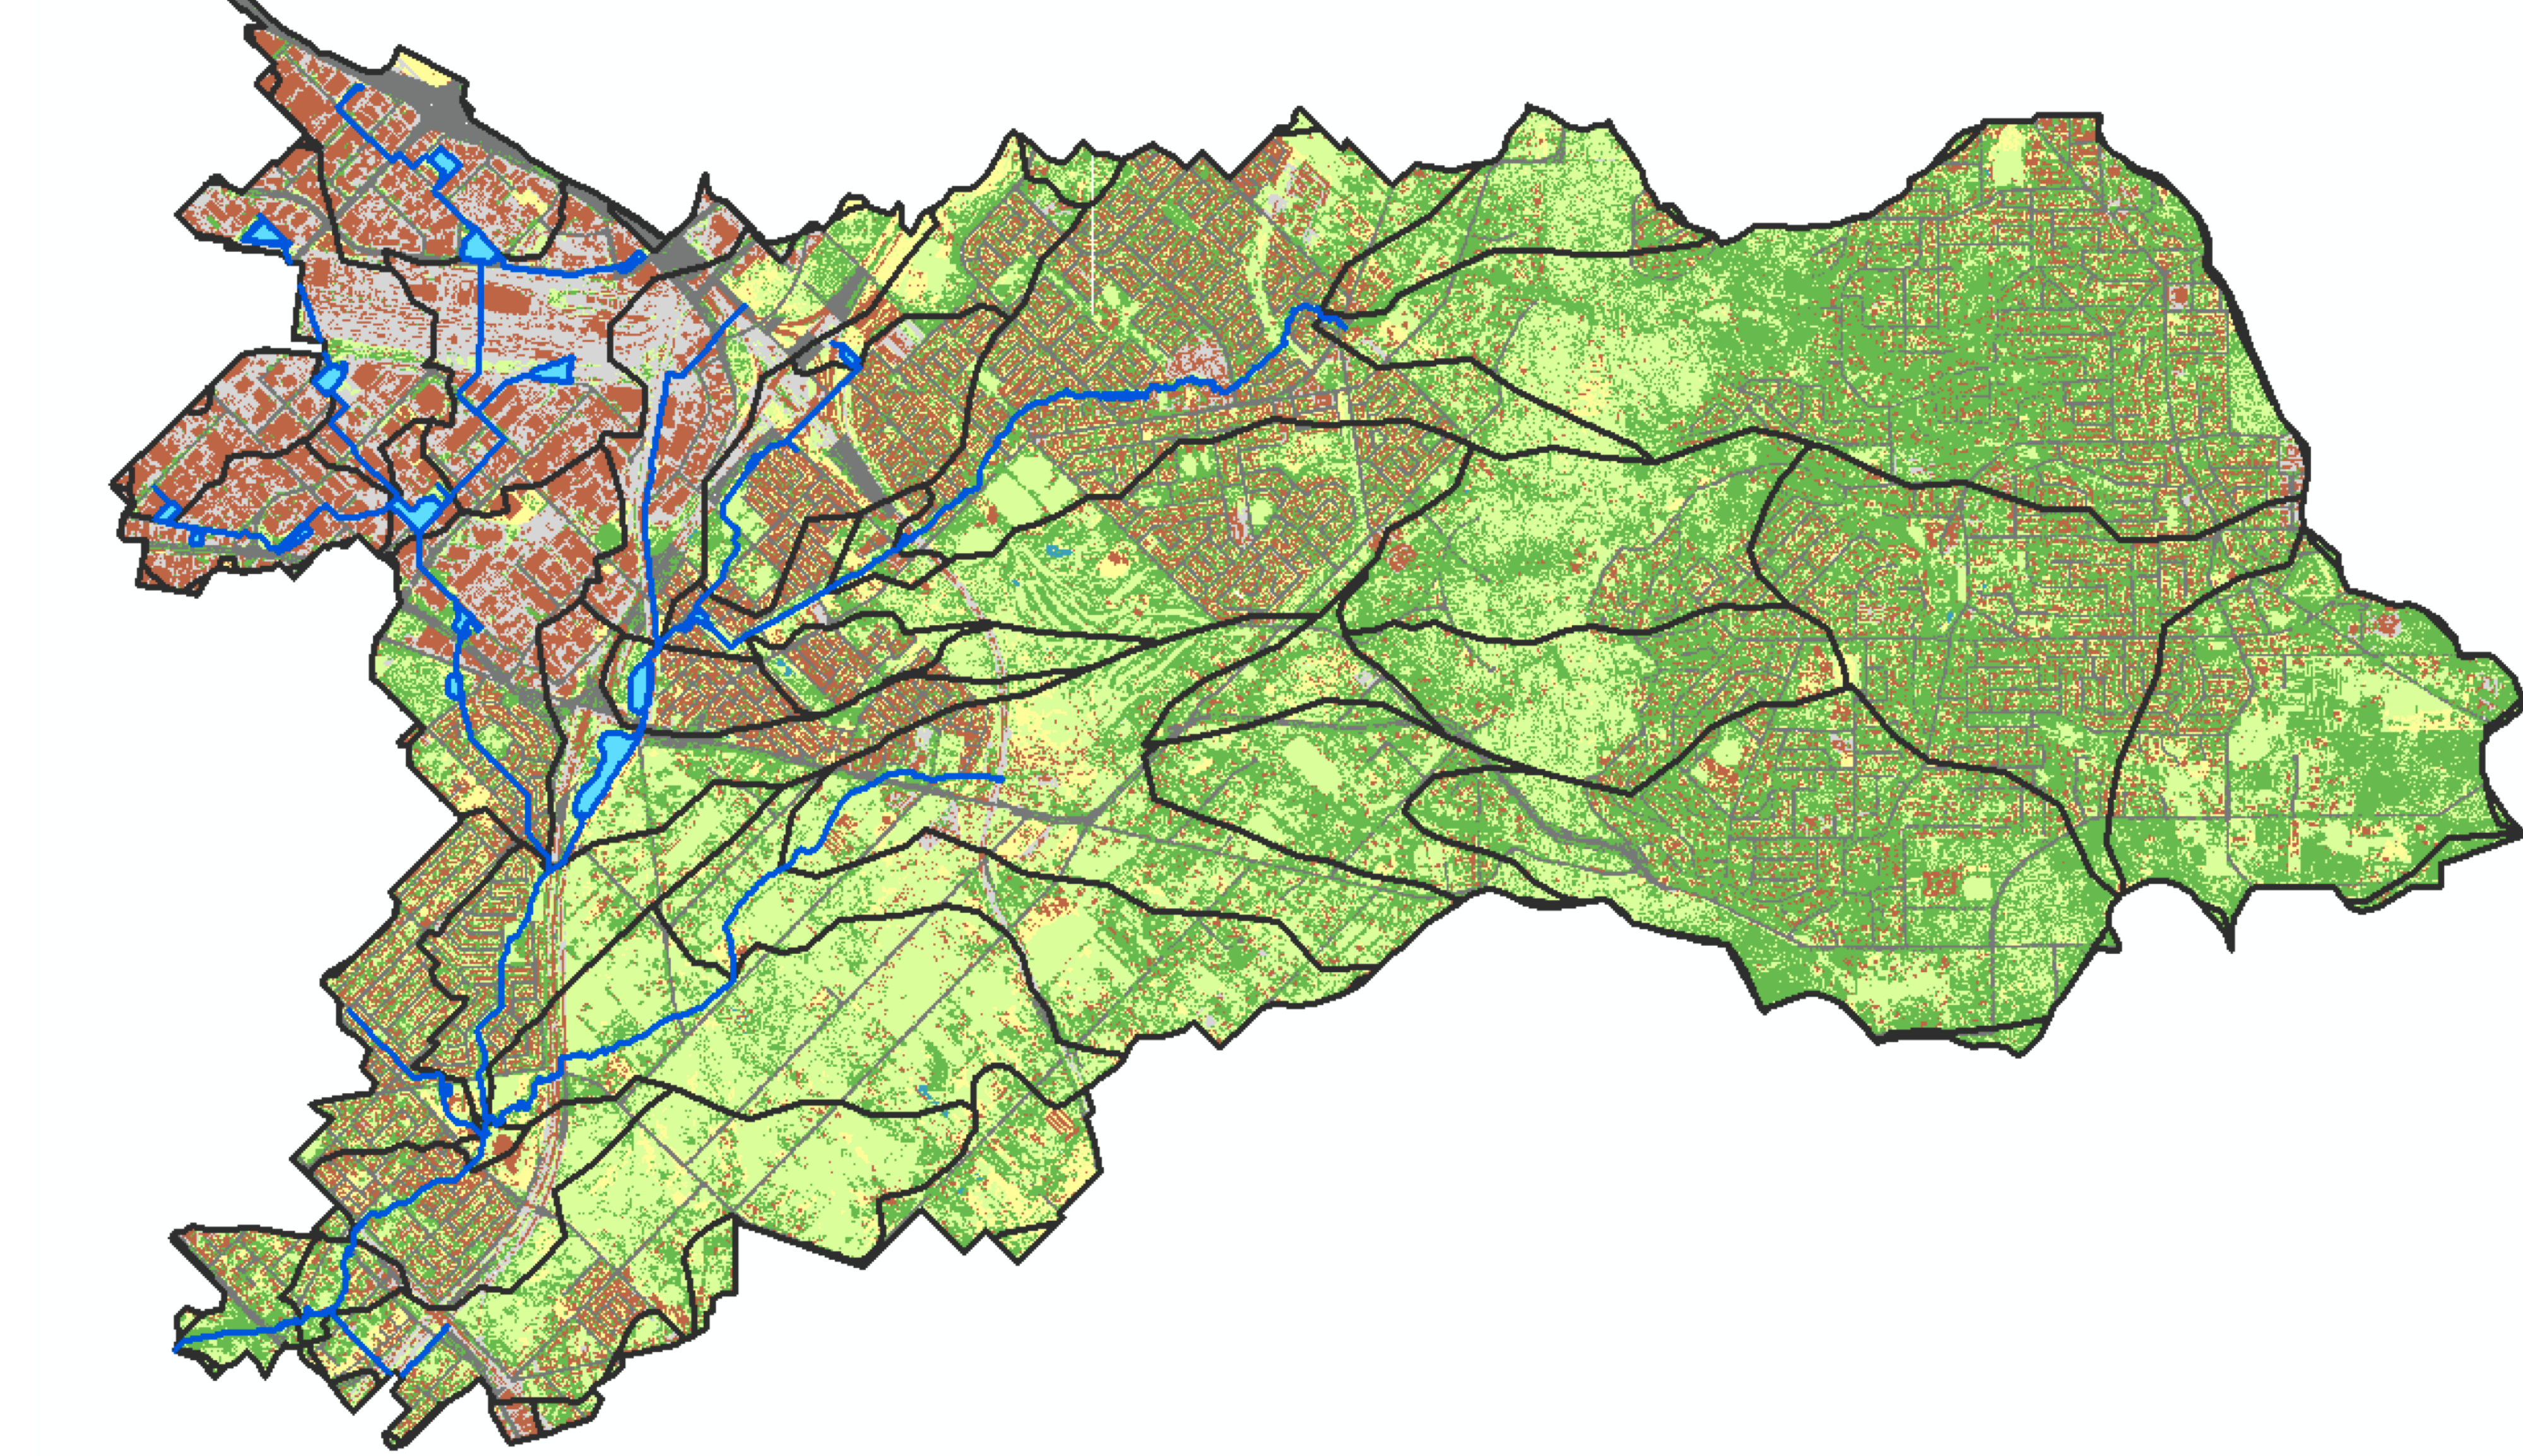 Yule Brook catchment land cover pattern.